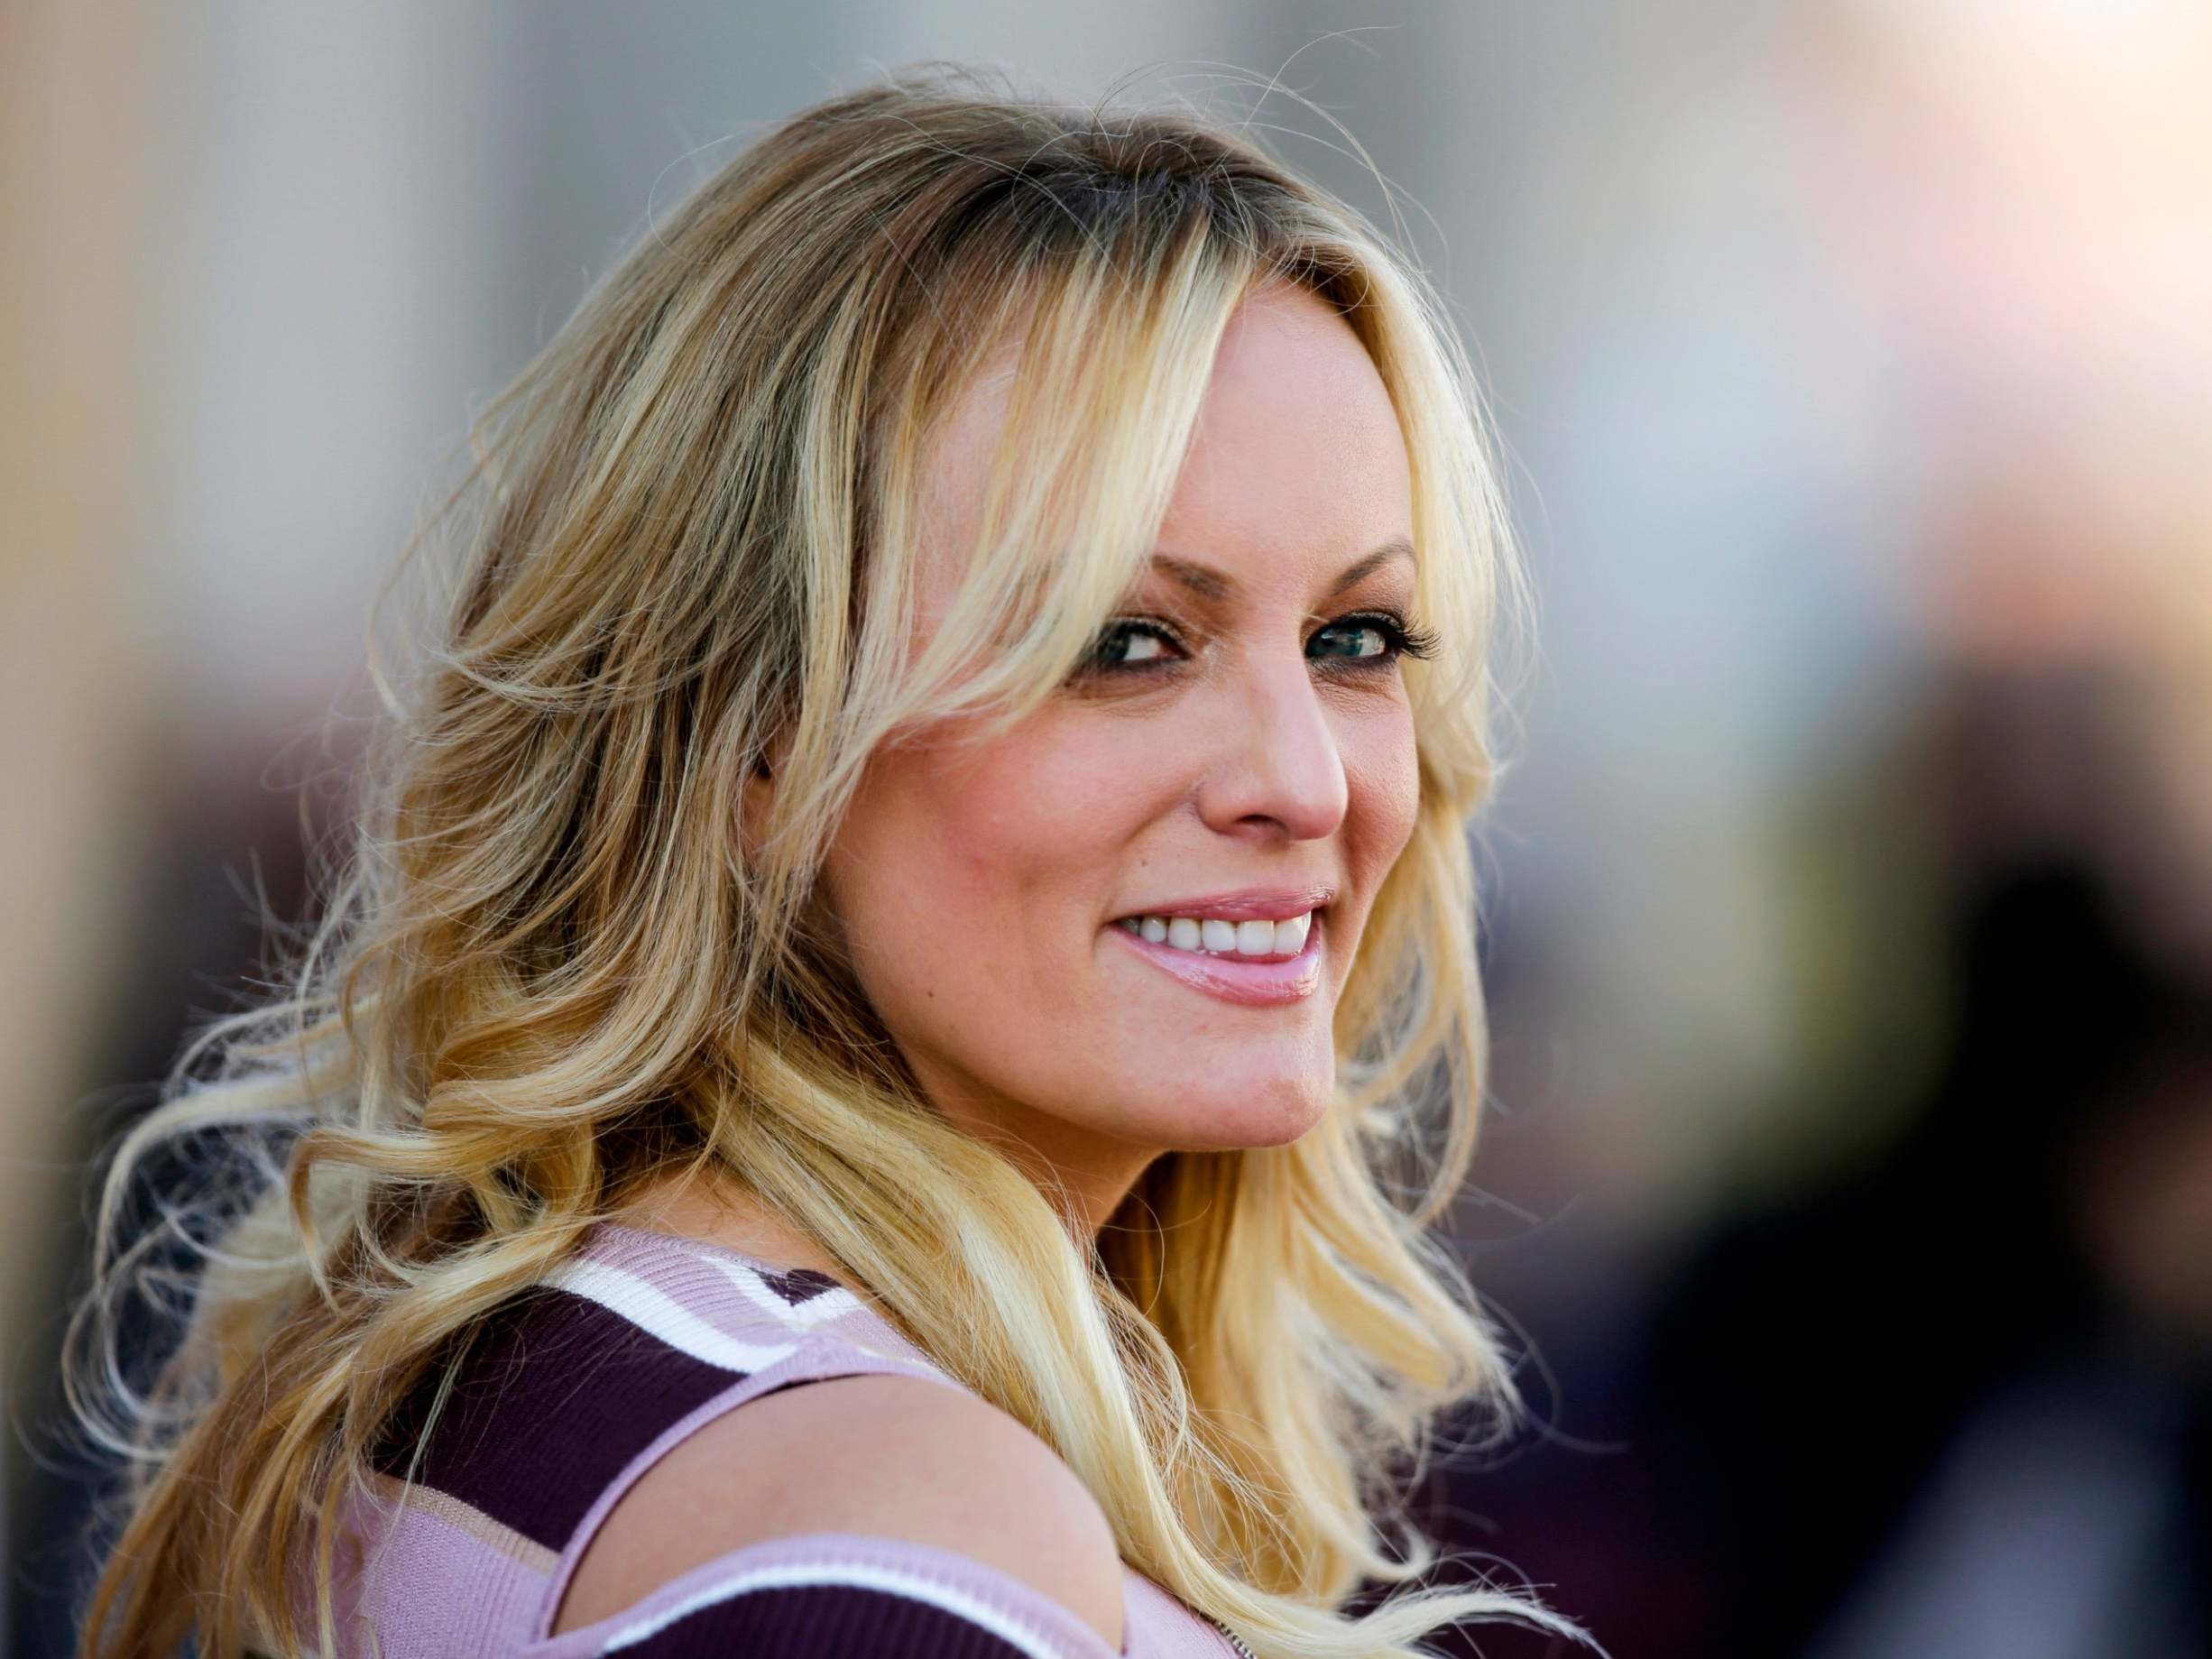 File image of adult film actress Stormy Daniels.